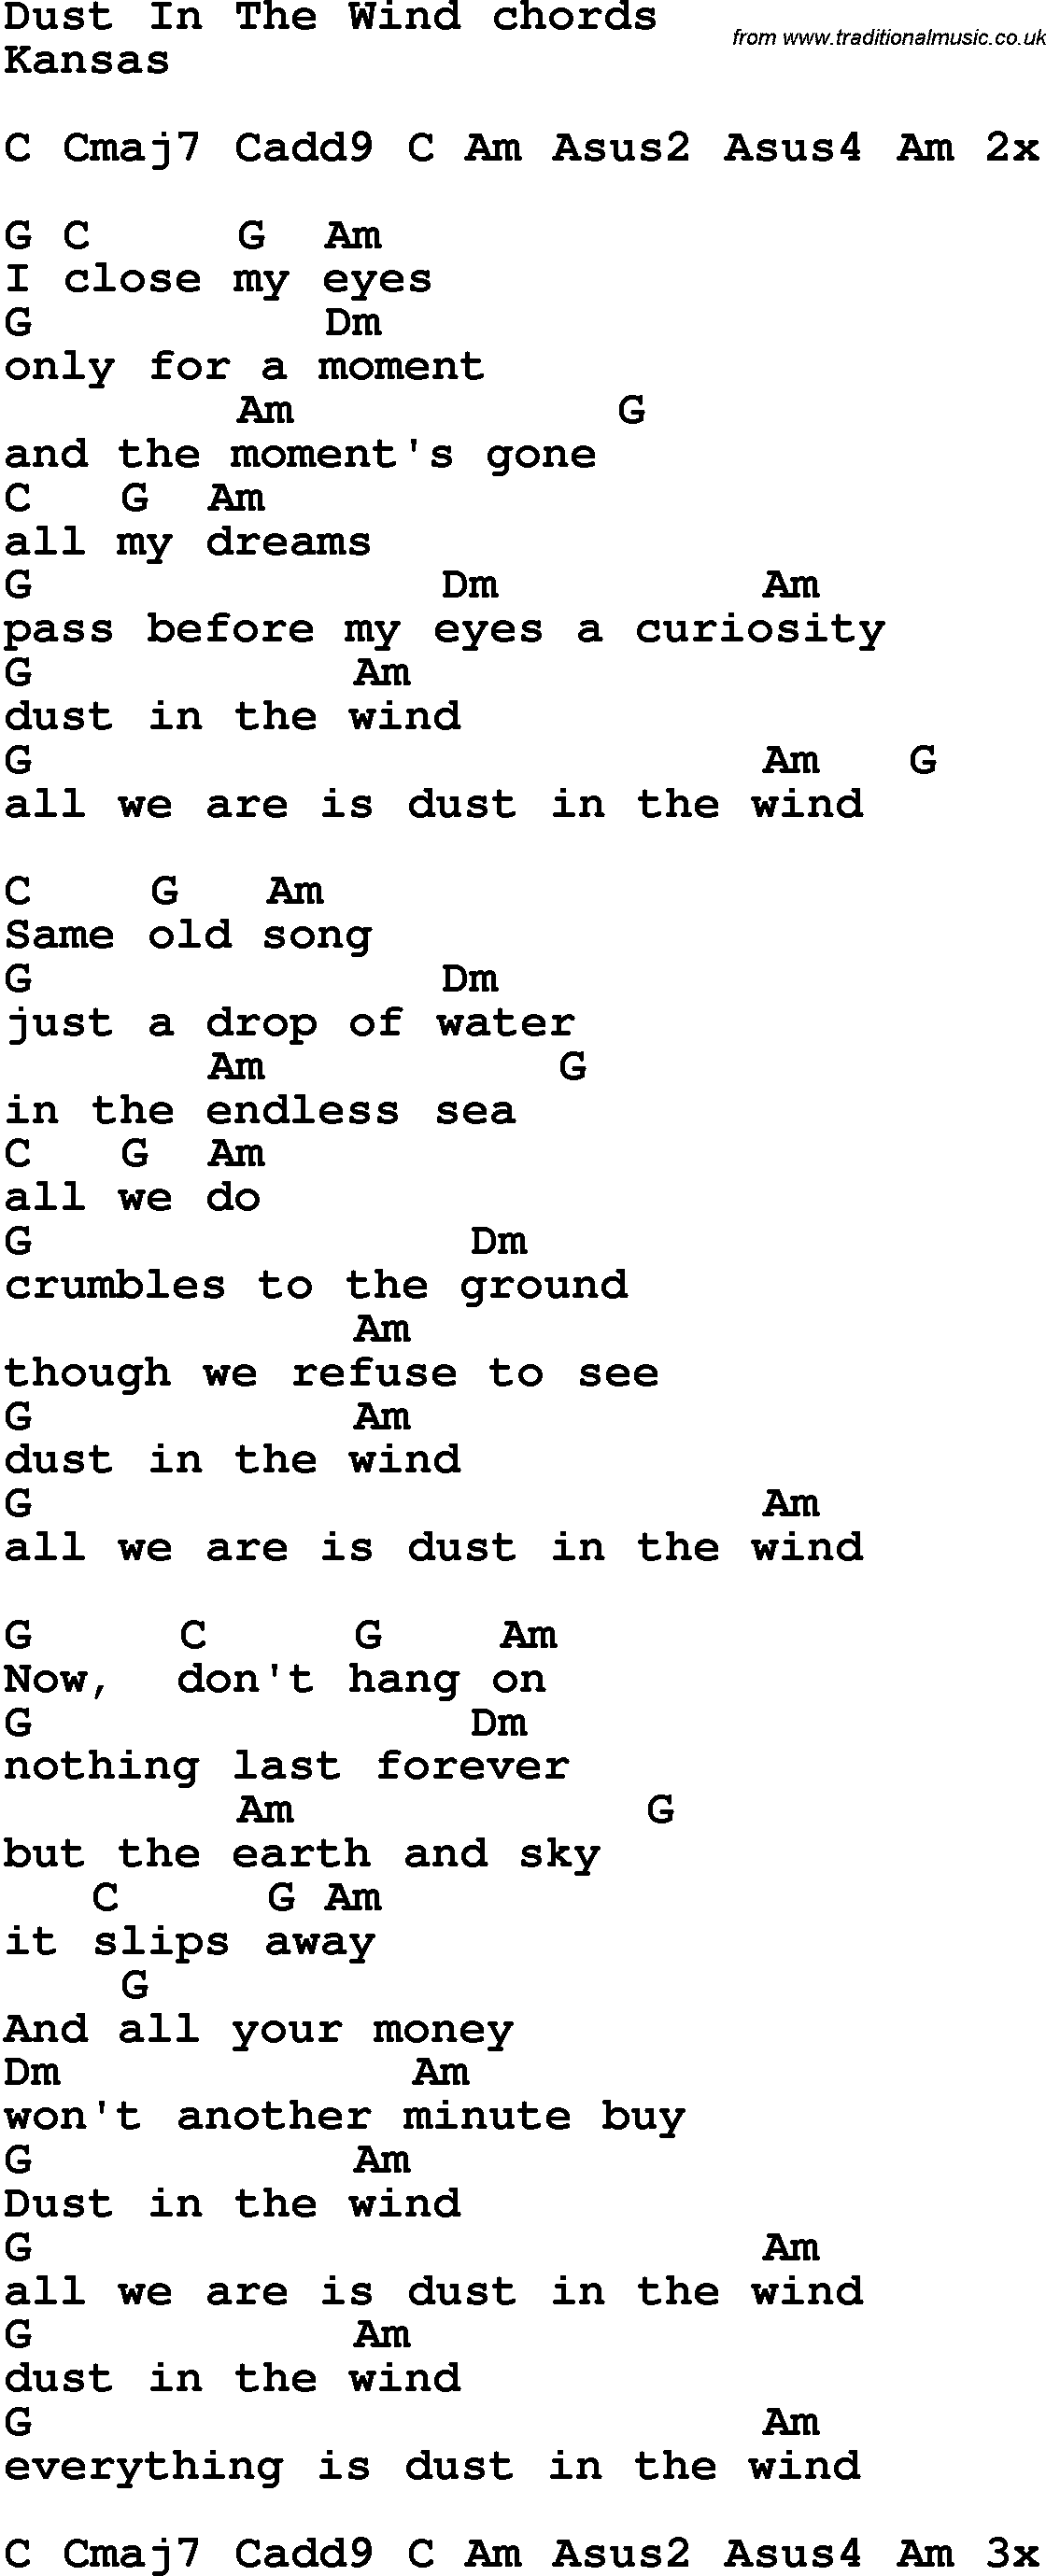 Song Lyrics with guitar chords for Dust In The Wind